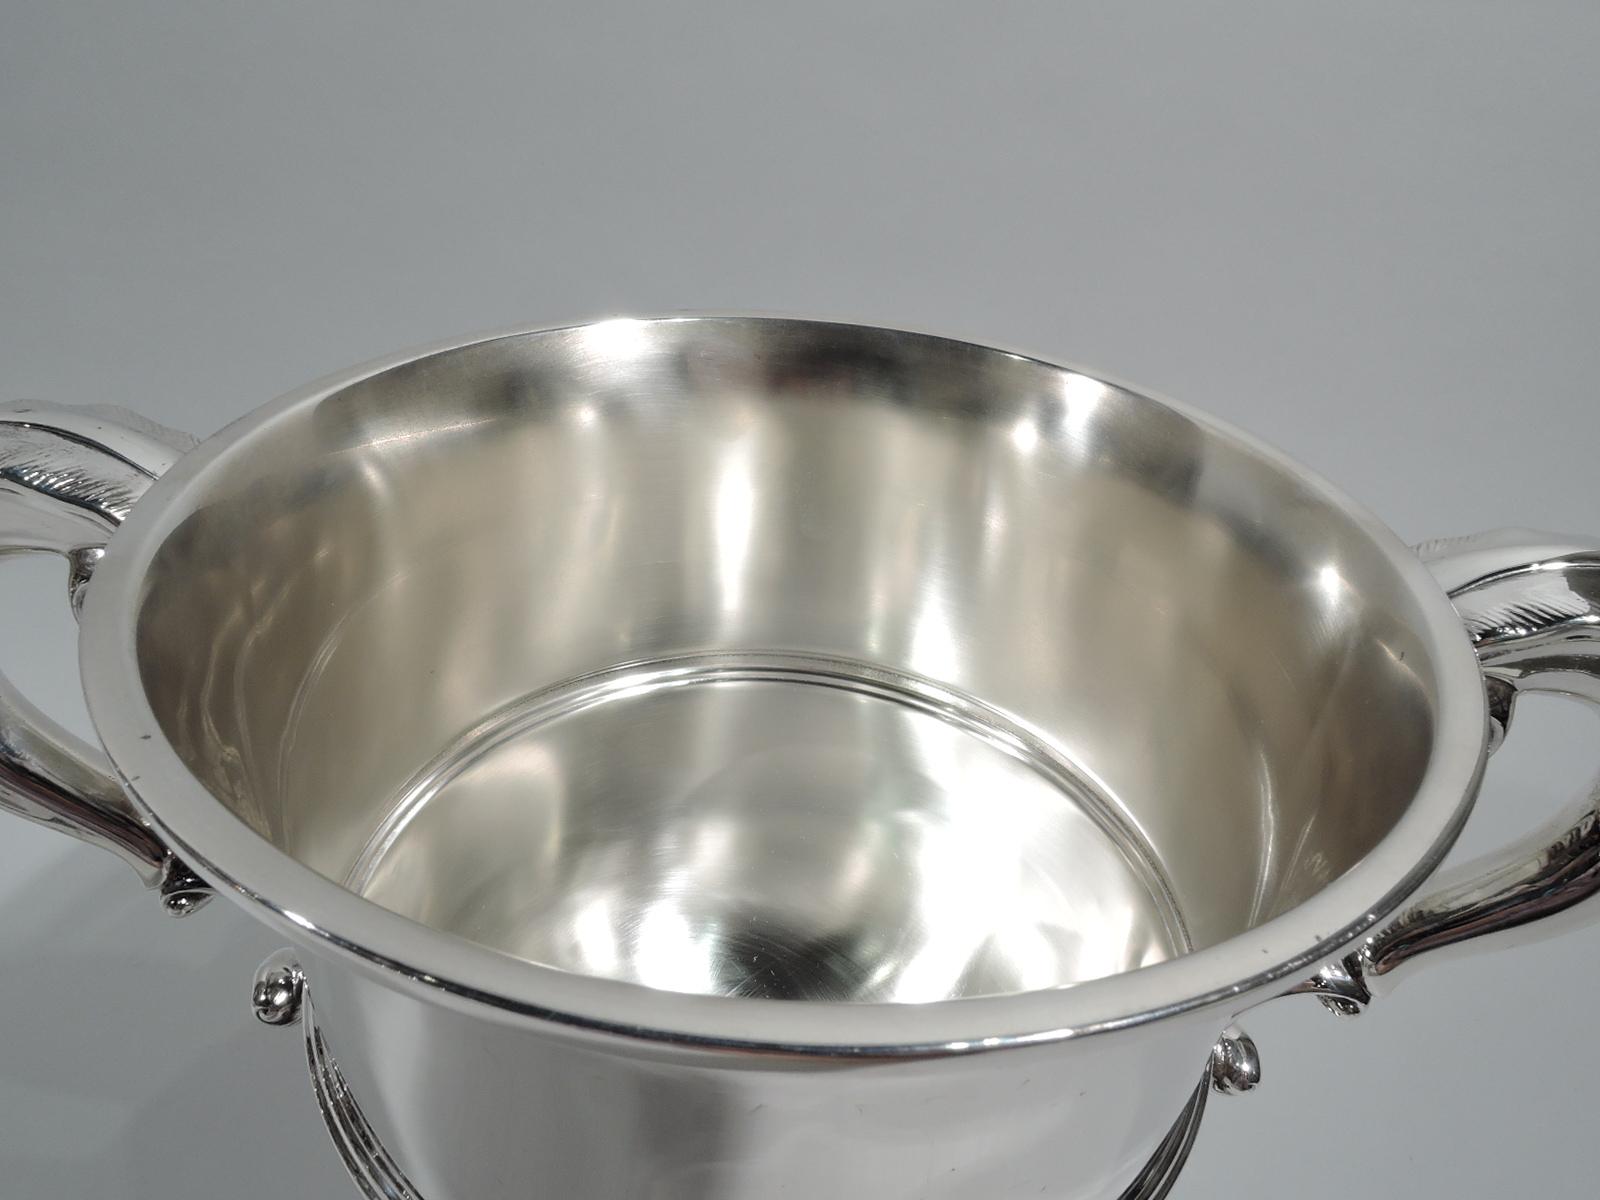 George V sterling silver trophy cup. Made by Adie Bros in Birmingham in 1925. Girdled urn with leaf-capped s-scroll side handles and domed foot. Timeless Classical form with plenty of room for engraving. Fully marked. Weight: 23.5 troy ounces.